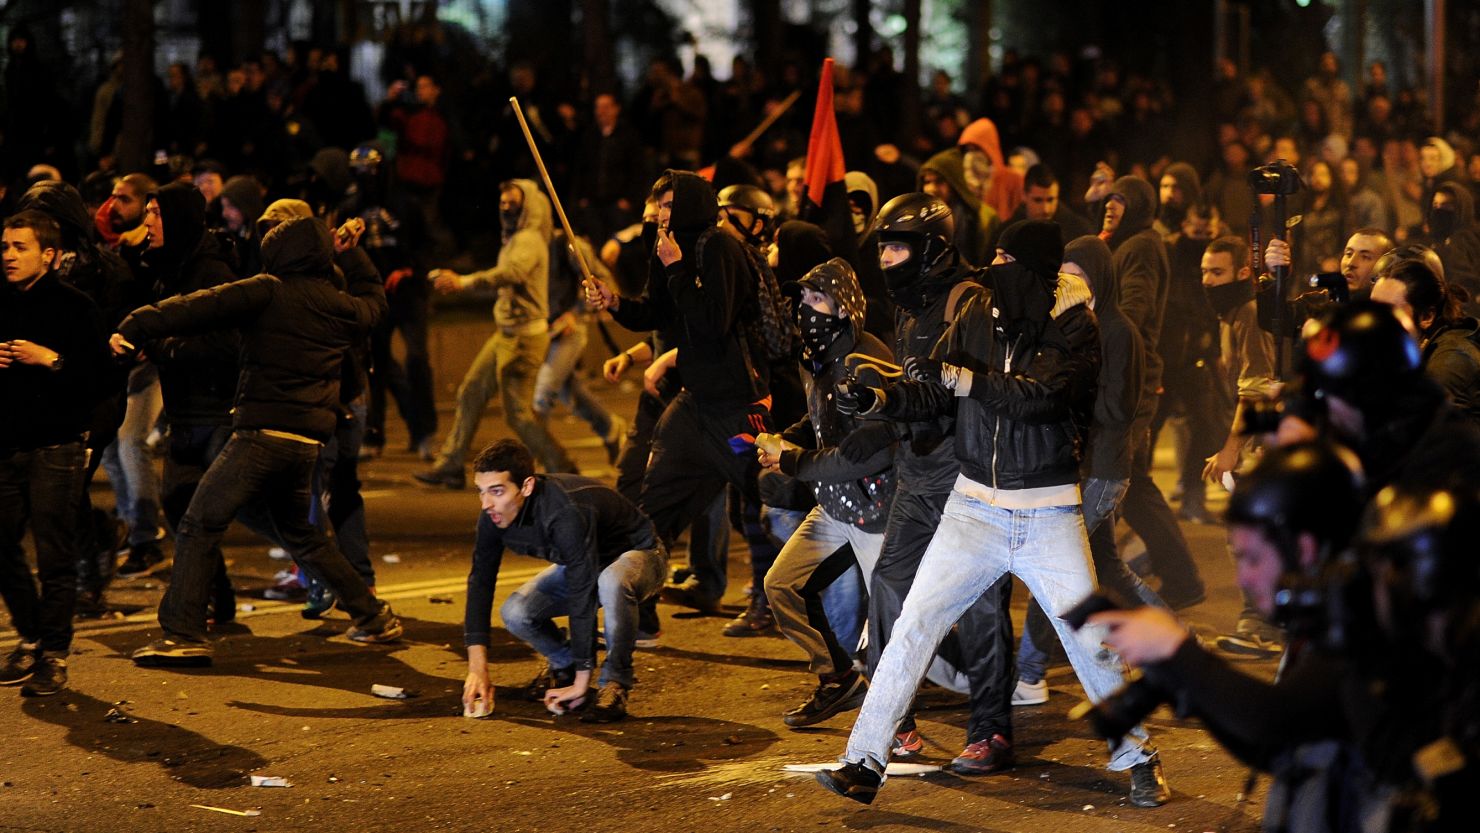 Demonstrators confront police in Madrid as an anti-austerity protest ends in clashes.